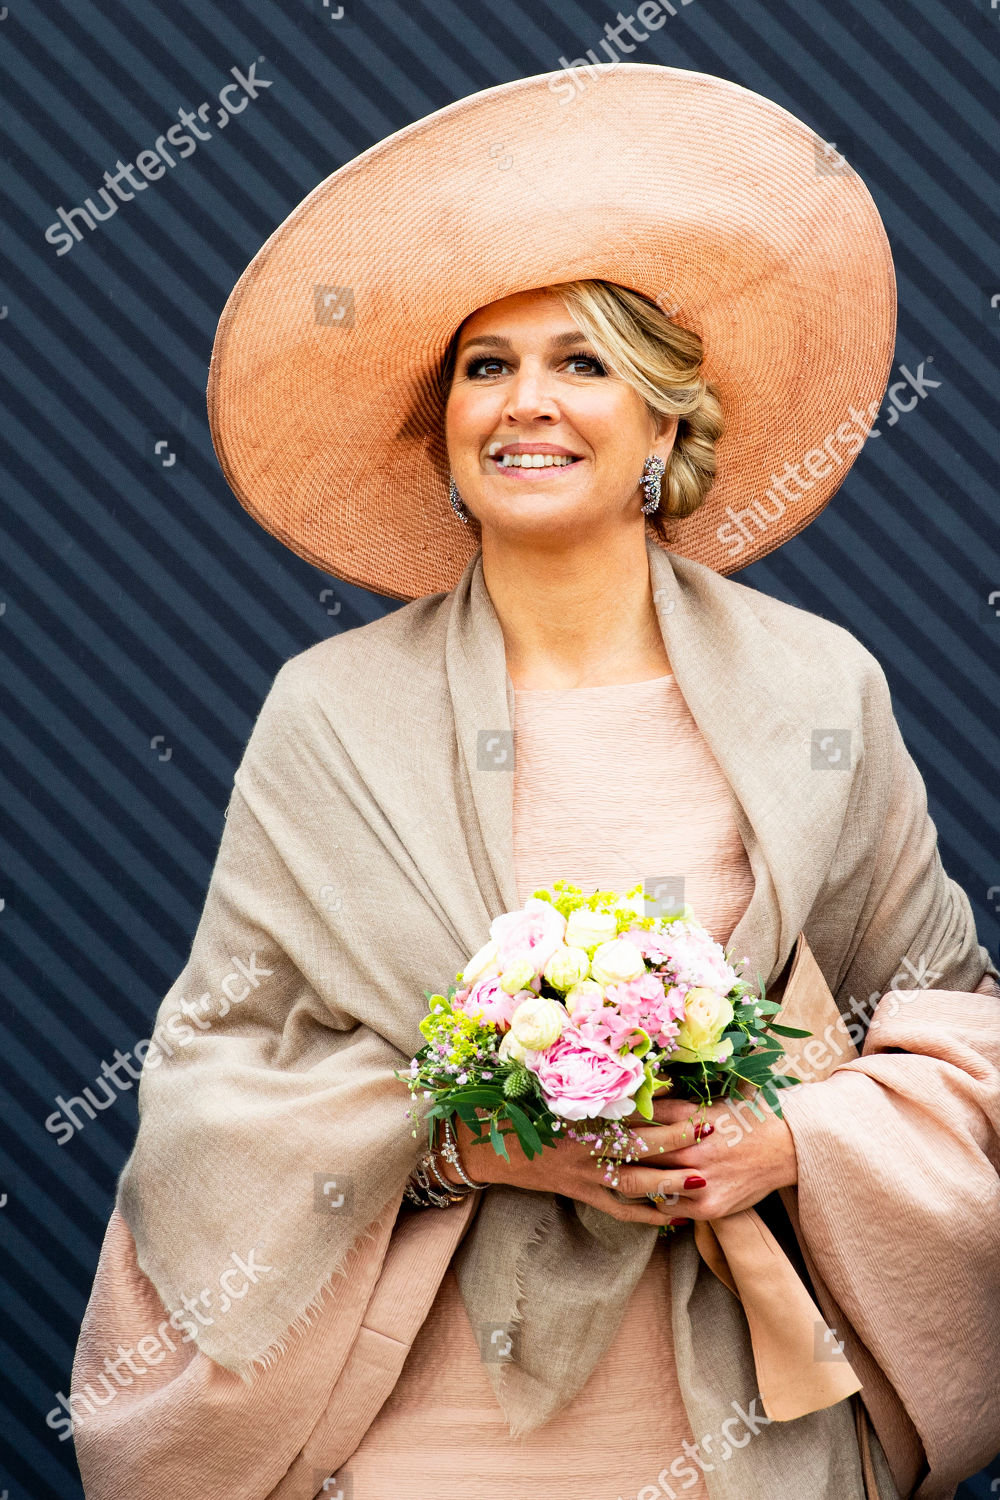 king-willem-alexander-and-queen-maxima-visit-to-germany-shutterstock-editorial-10243489ca.jpg